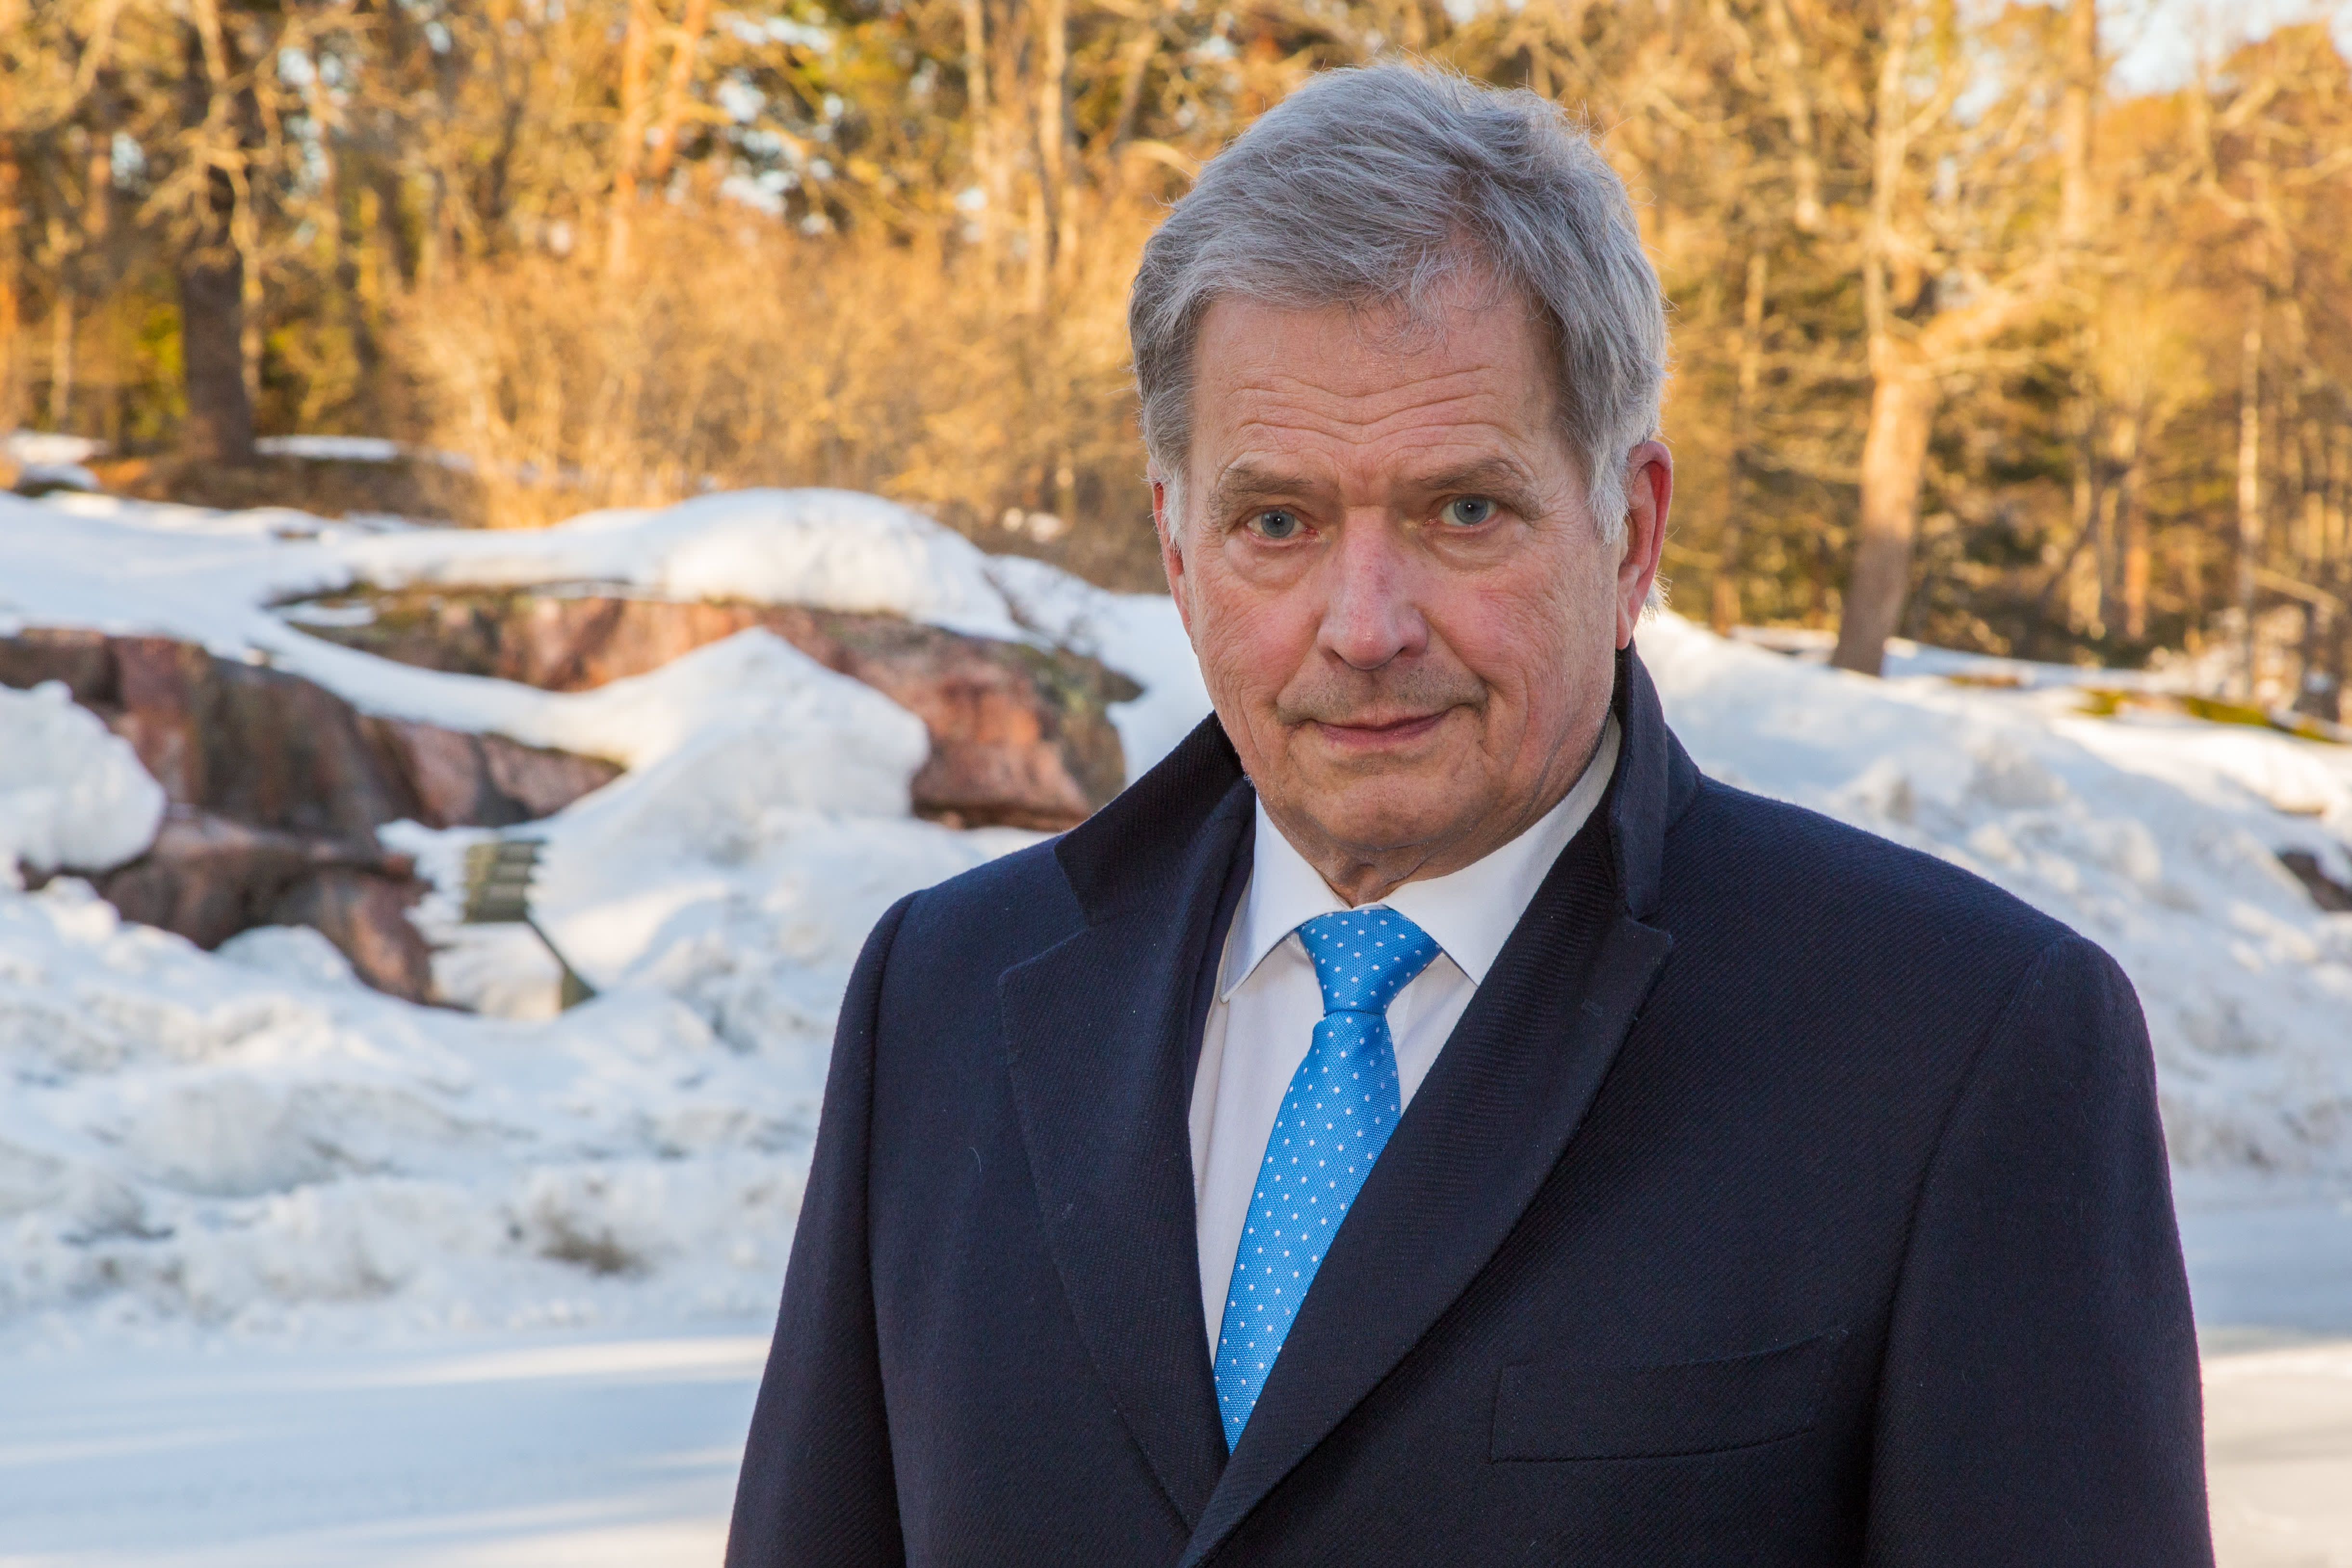 President of Finland: Decision to postpone the elections "understandable"